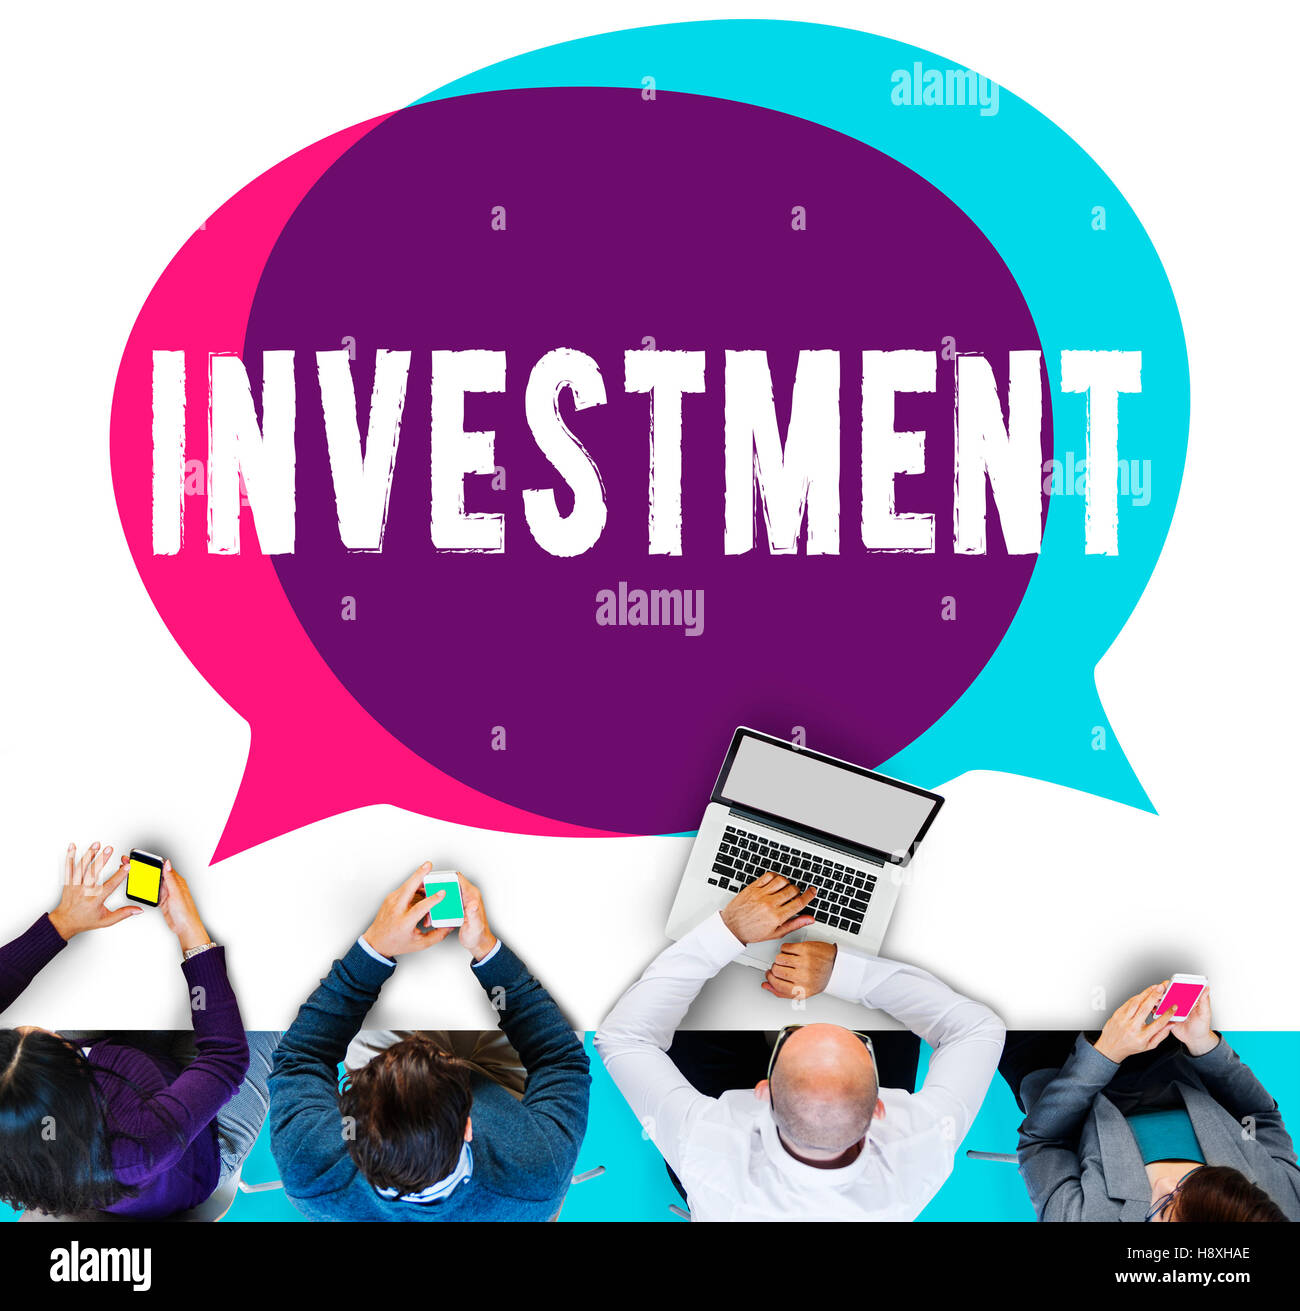 Investment Economy Financial Investing Income Concept Stock Photo